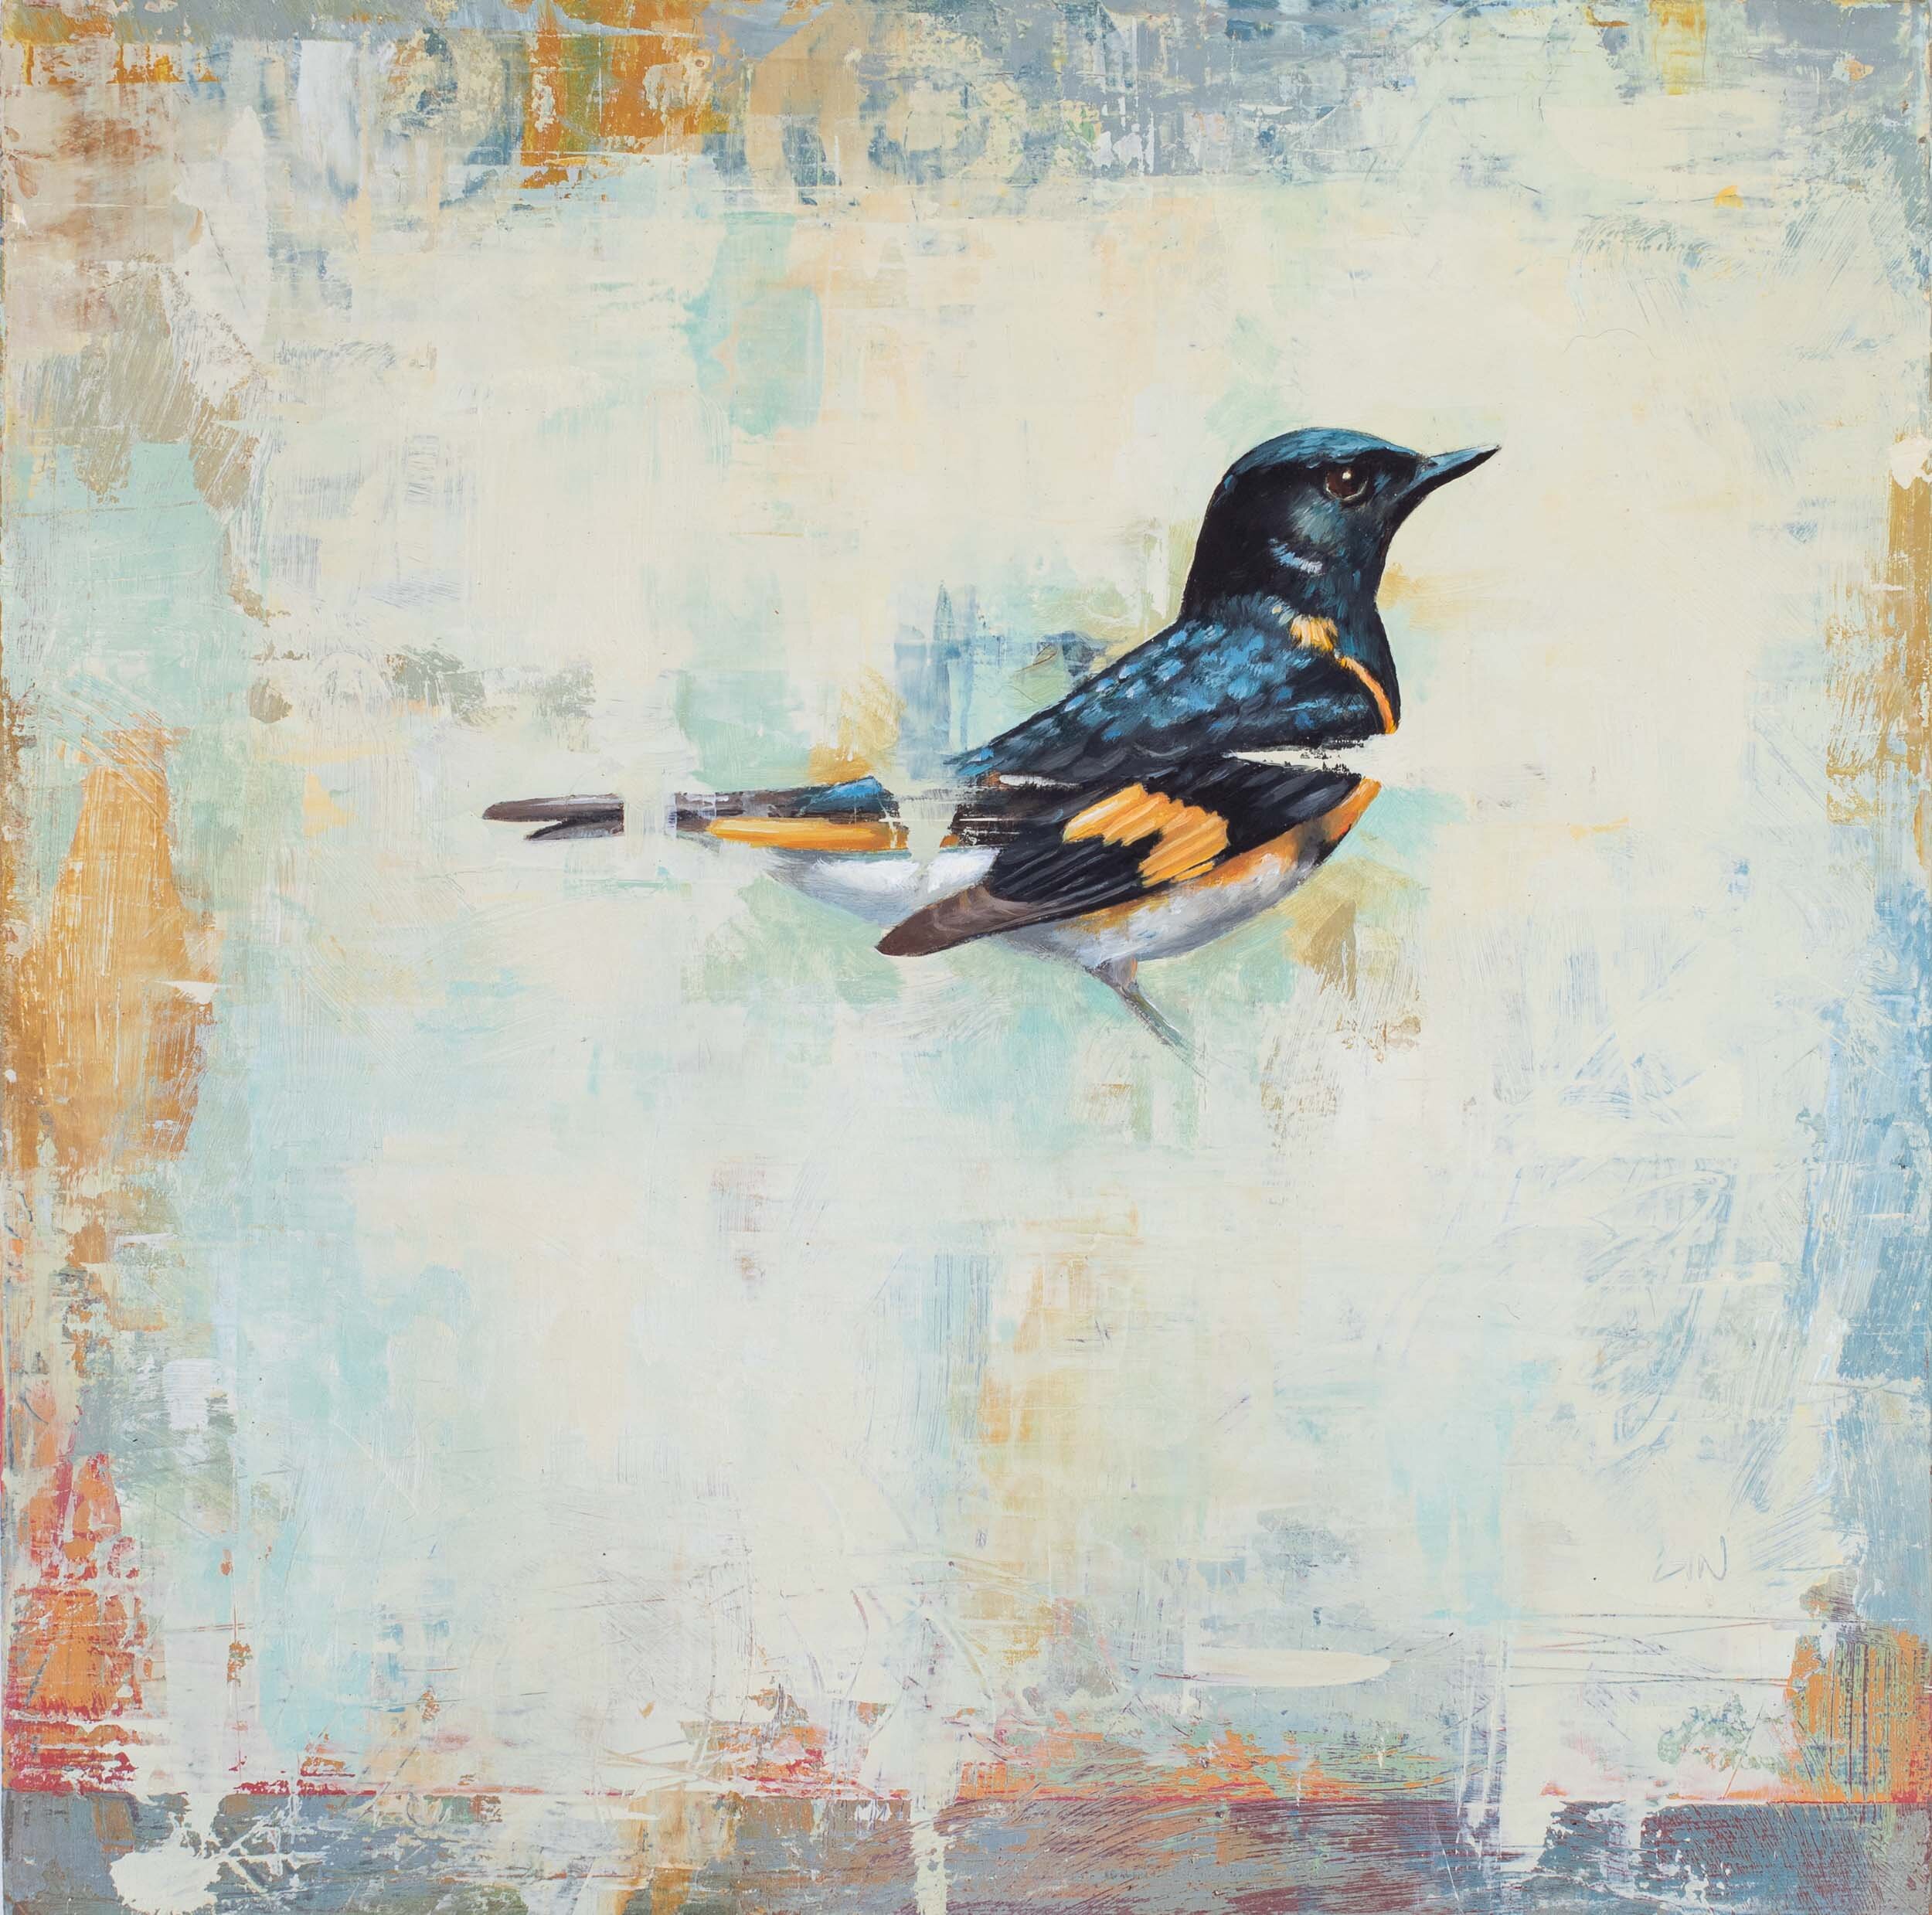   American Redstart  2020 oil on panel 10 x 10 inches   Sold 